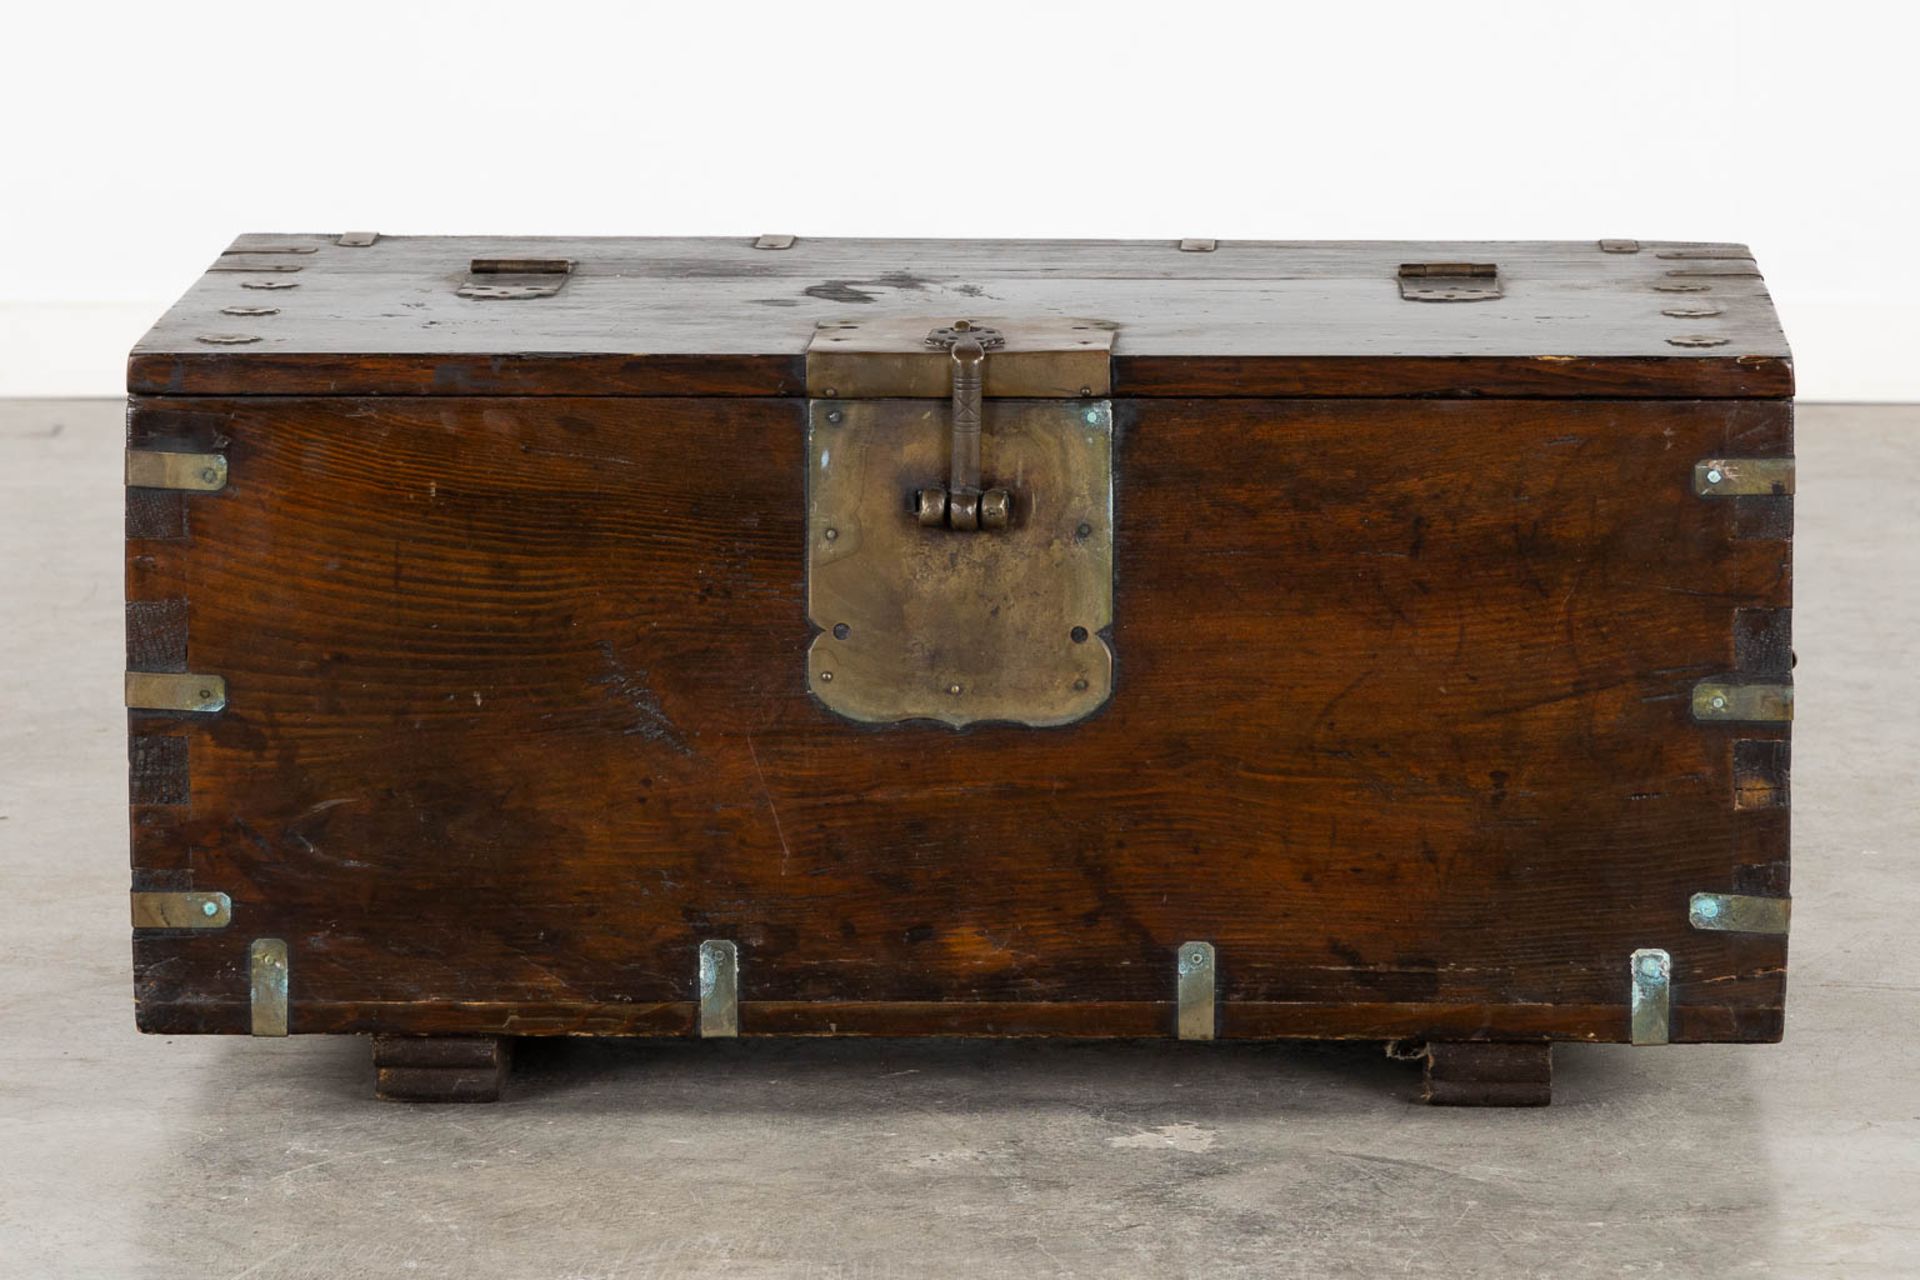 An antique Oriental chest with brass hardware. (L:43 x W:76 x H:40 cm) - Image 4 of 13